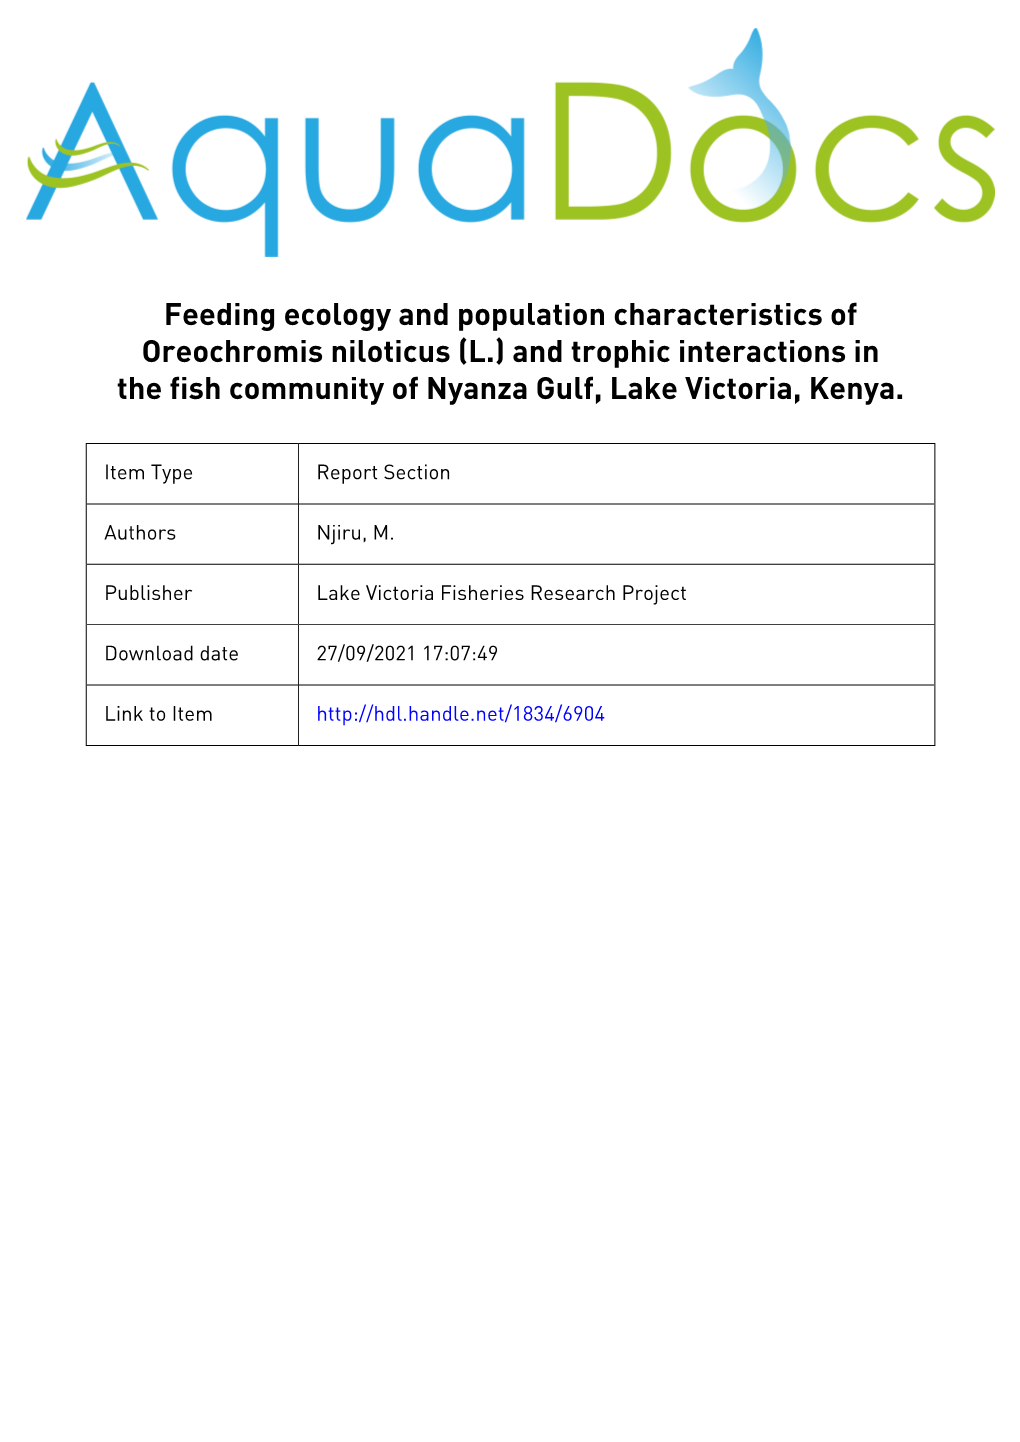 Feeding Ecology and Population Characteristics of Oreochromis Niloticus (L.) and Trophic Interactions in the Fish Community of Nyanza Gulf, Lake Victoria, Kenya